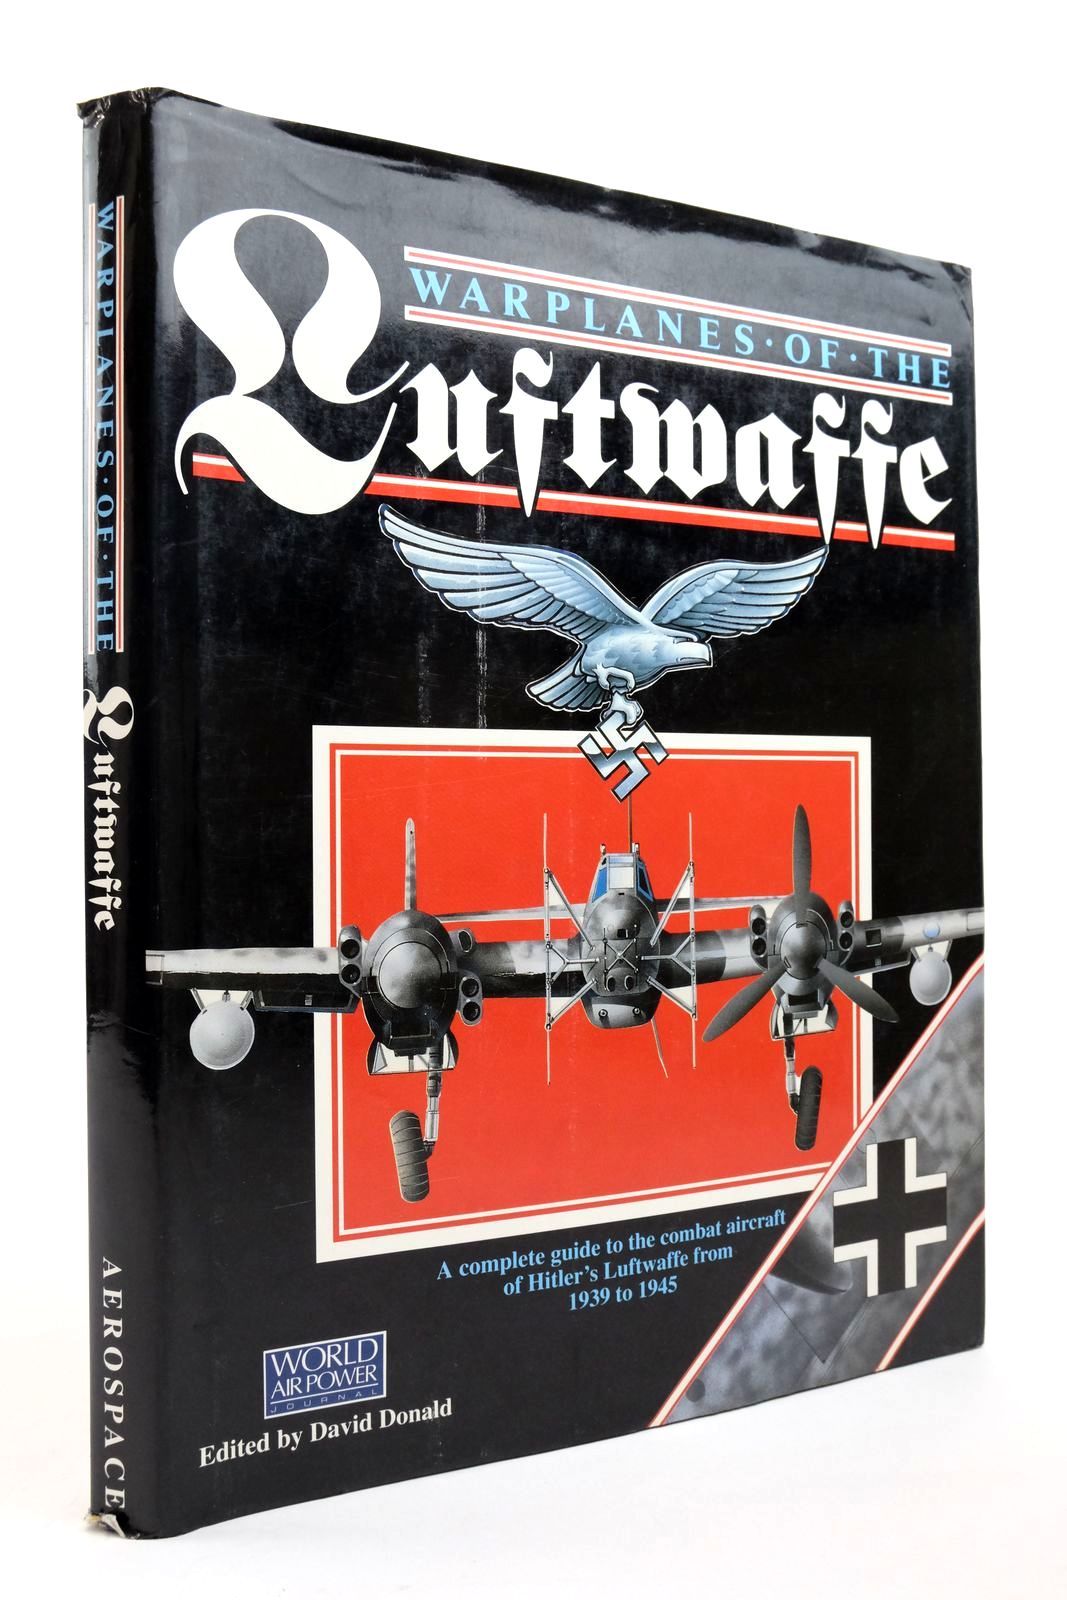 Photo of WARPLANES OF THE LUFTWAFFE written by Donald, David published by Aerospace (STOCK CODE: 2138477)  for sale by Stella & Rose's Books